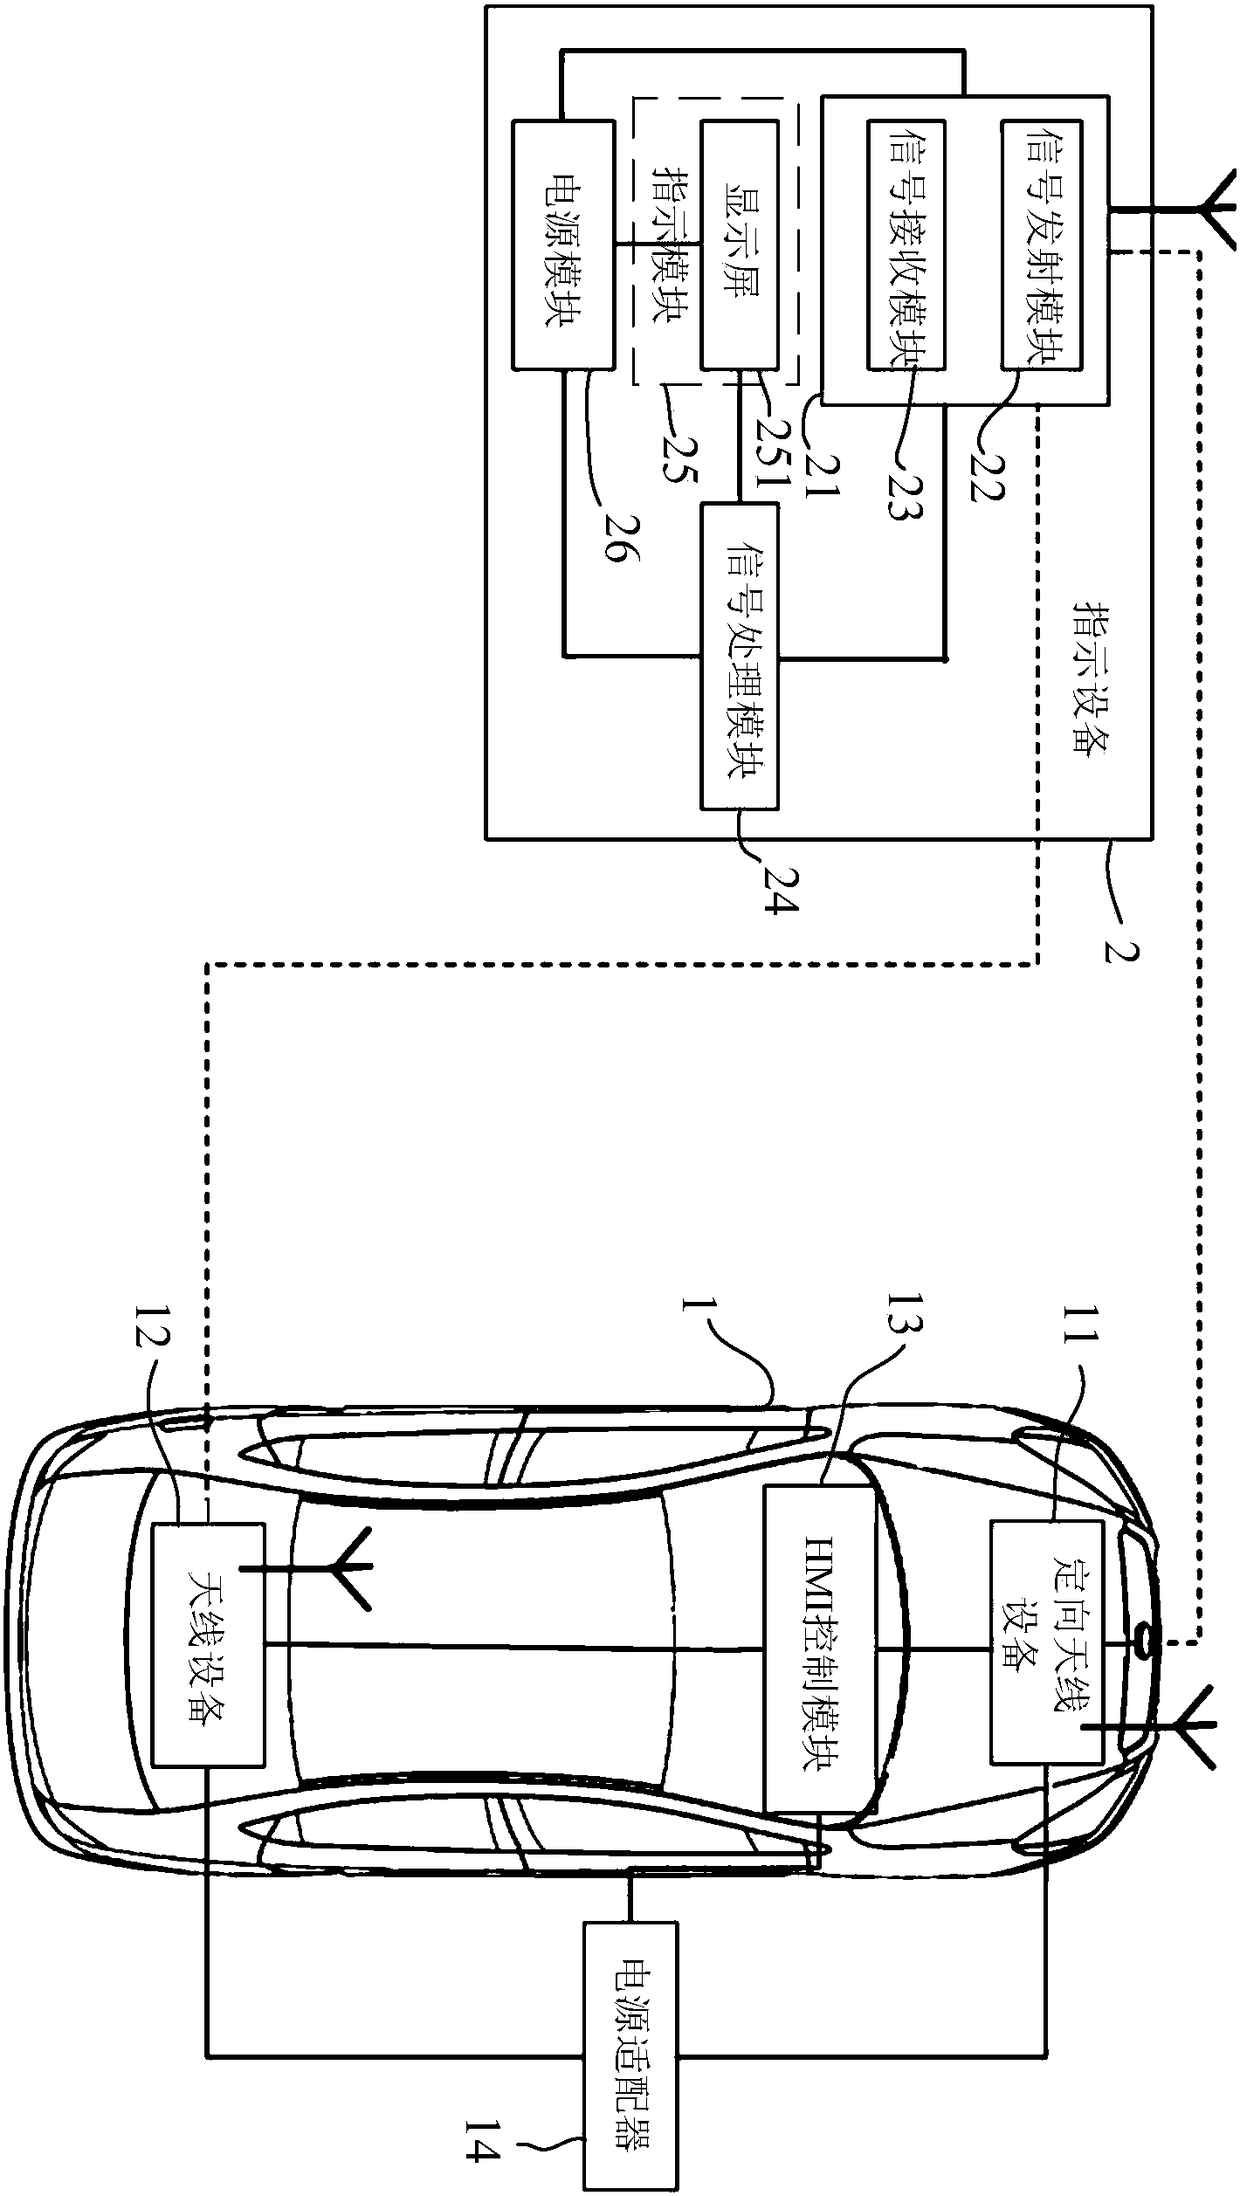 Automobile finding system, automobile finding method and automobile